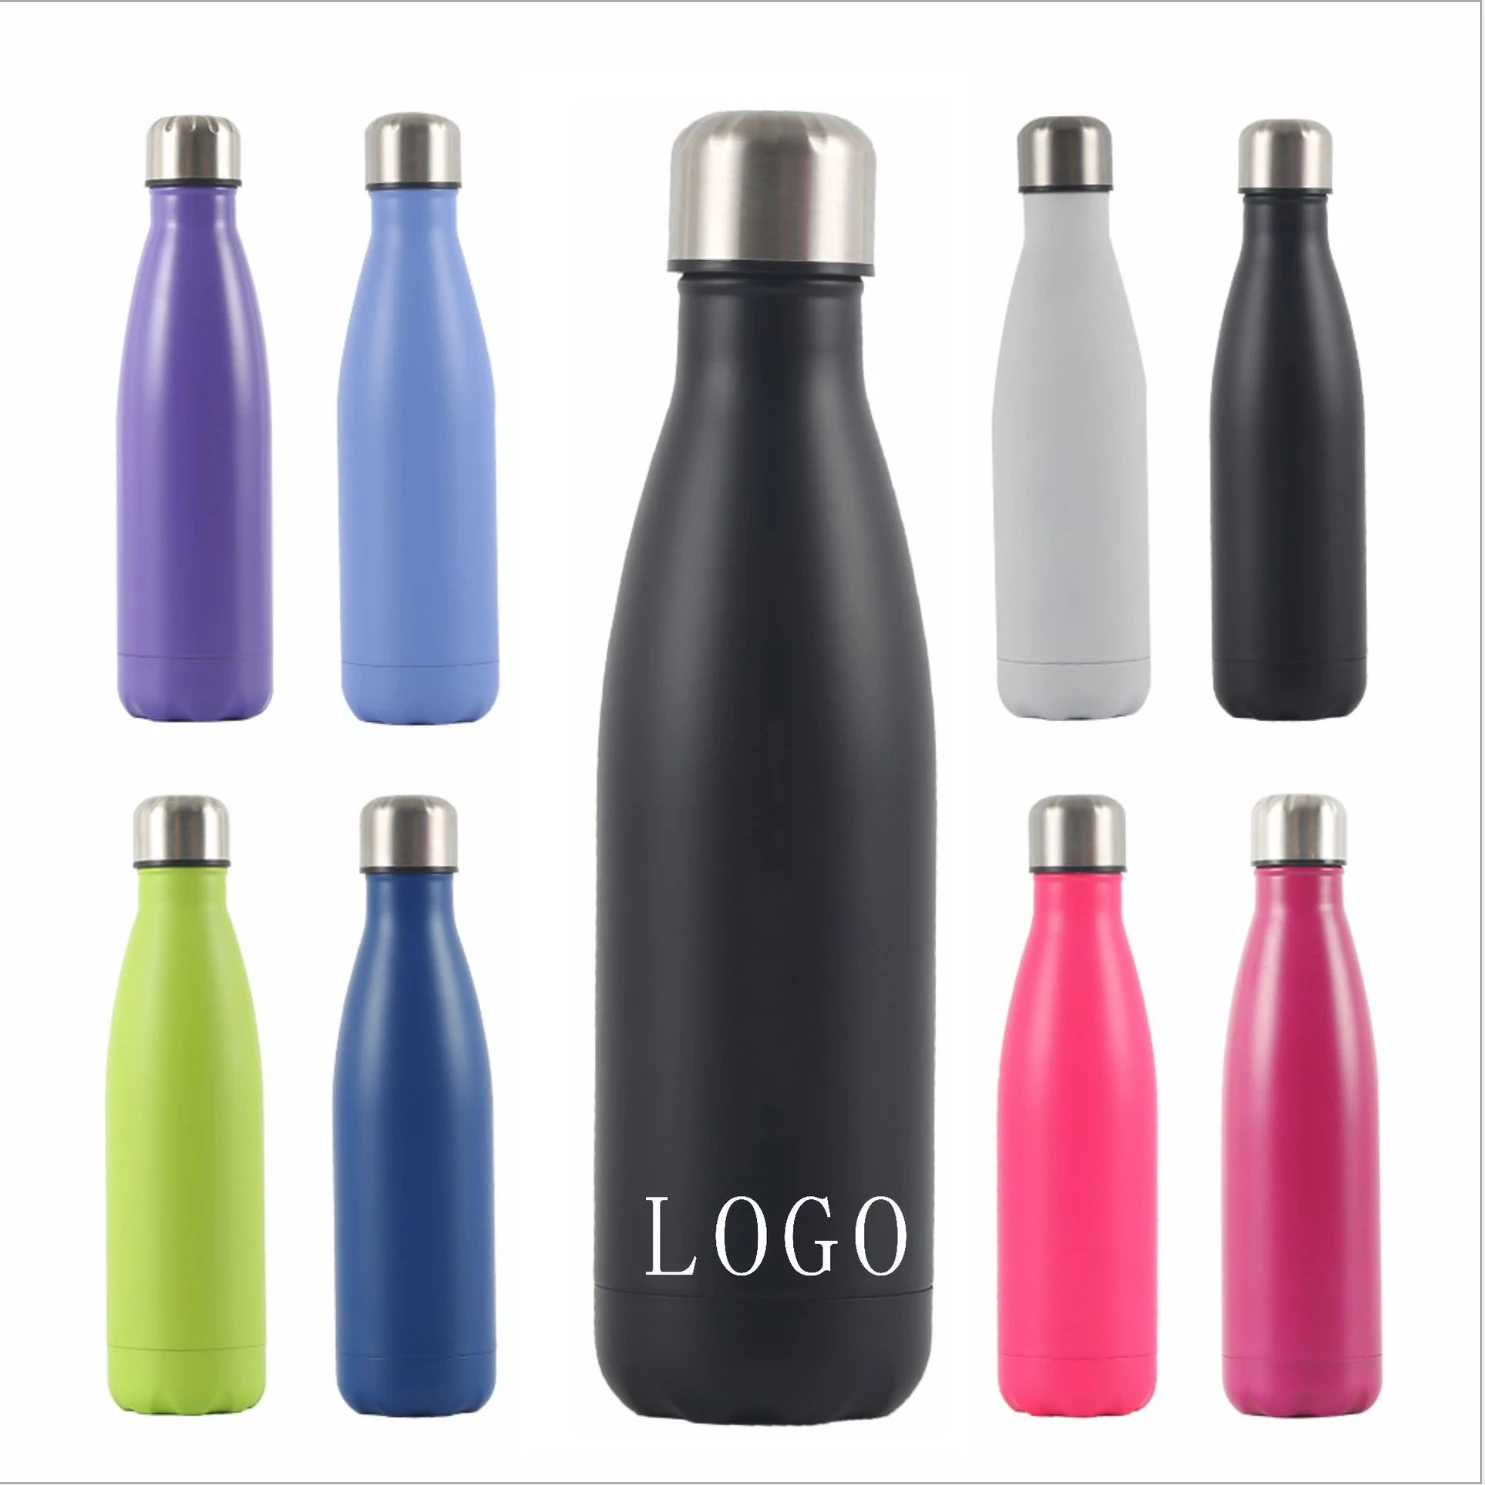 

Matte paint Optional UV cleaning lid 350ml/500ml Cold Water Bottle Insulated Vacuum Stainless Steel Cola Bottle Mug Beer Bottle